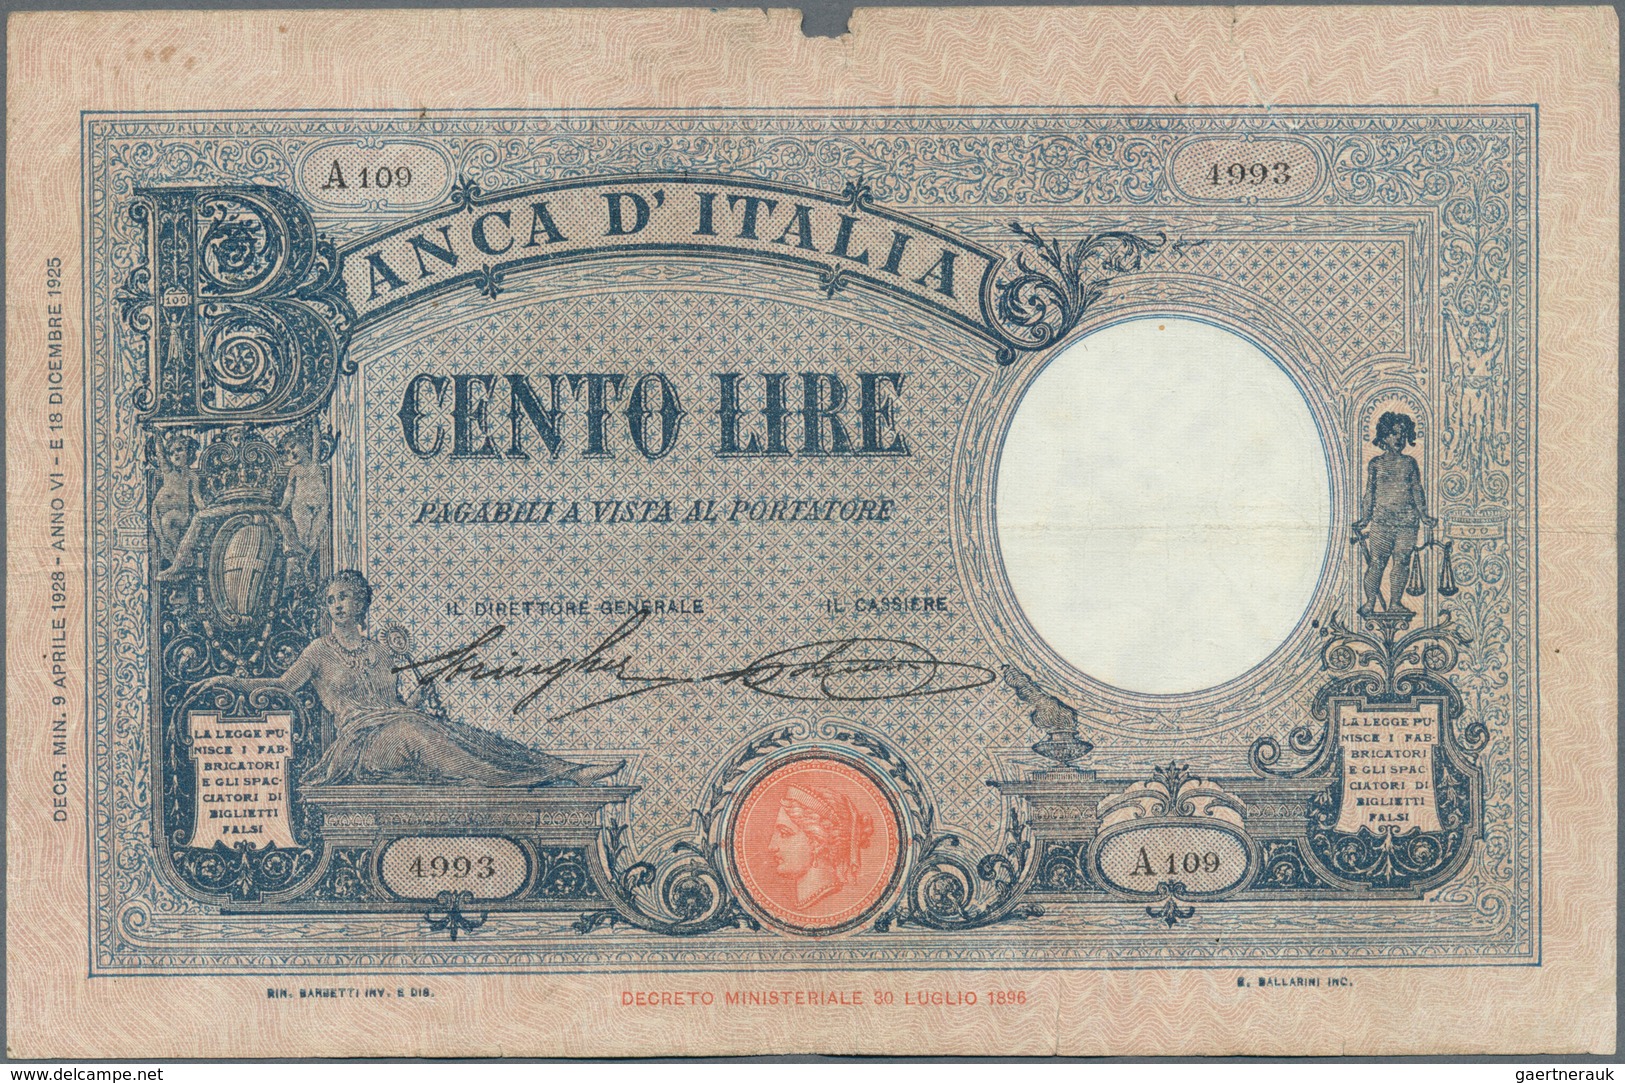 Italy / Italien: set of 6 notes of 100 Lire 1926/28/29/33/34 P. 50, all used with folds, border tear